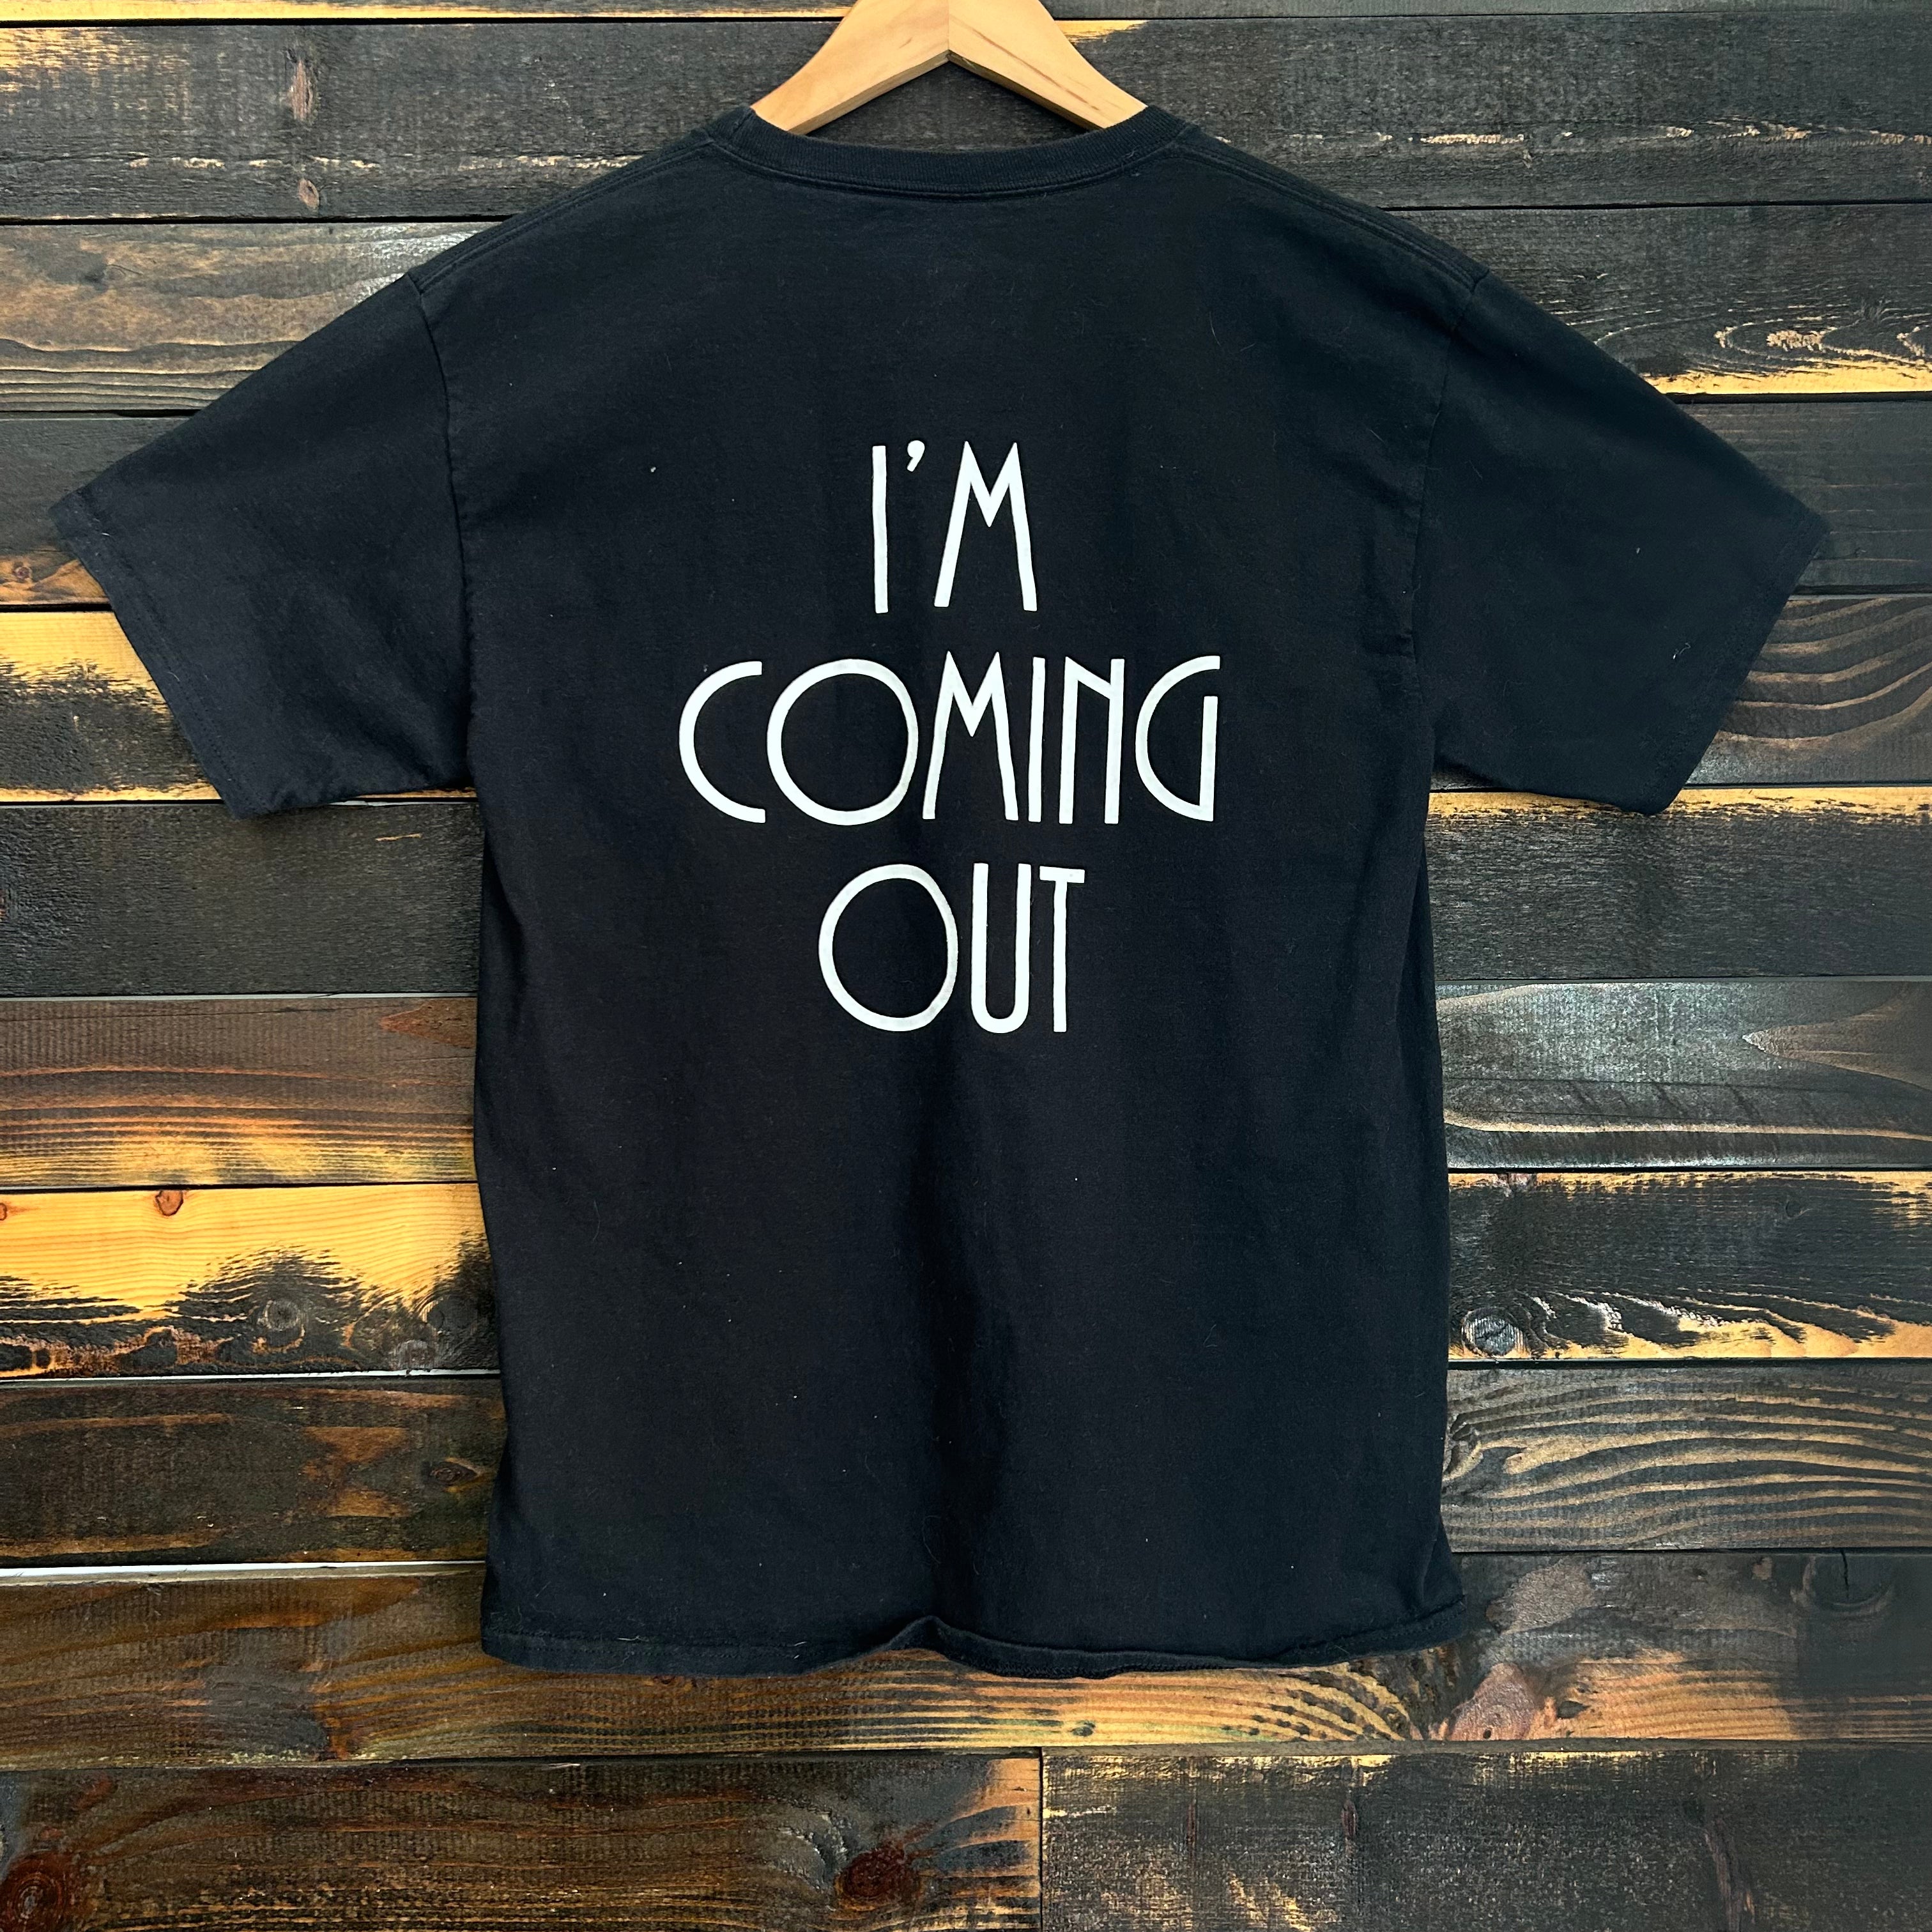 TGH Diana Ross "I'm Coming Out" Tee